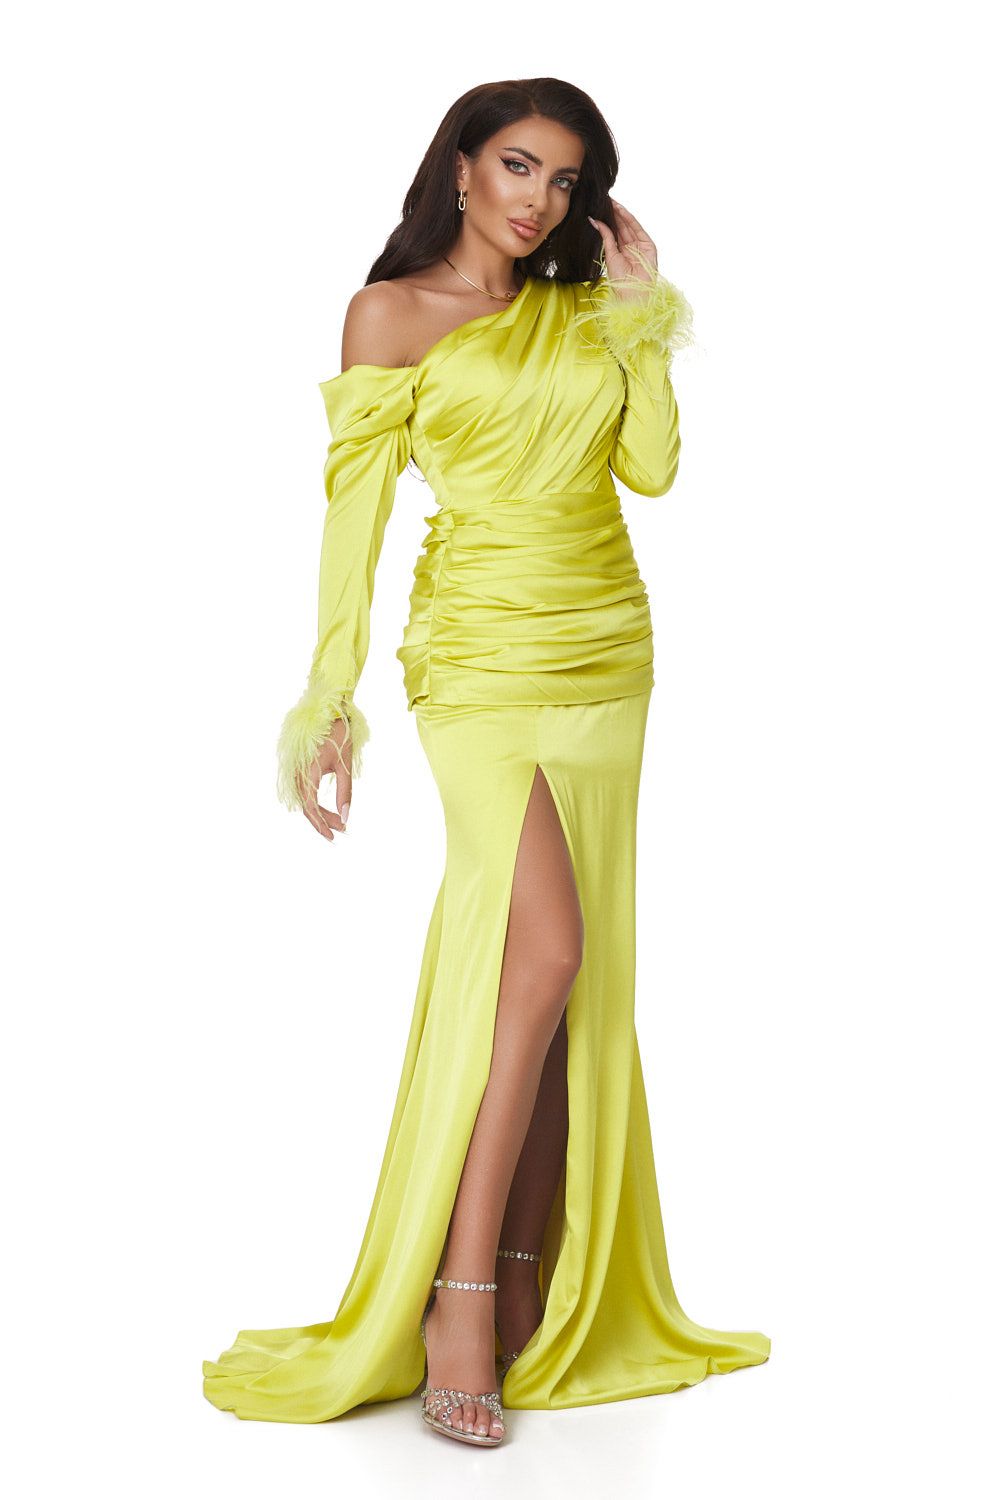 Long lime green satin voile dress Simmons Bogas